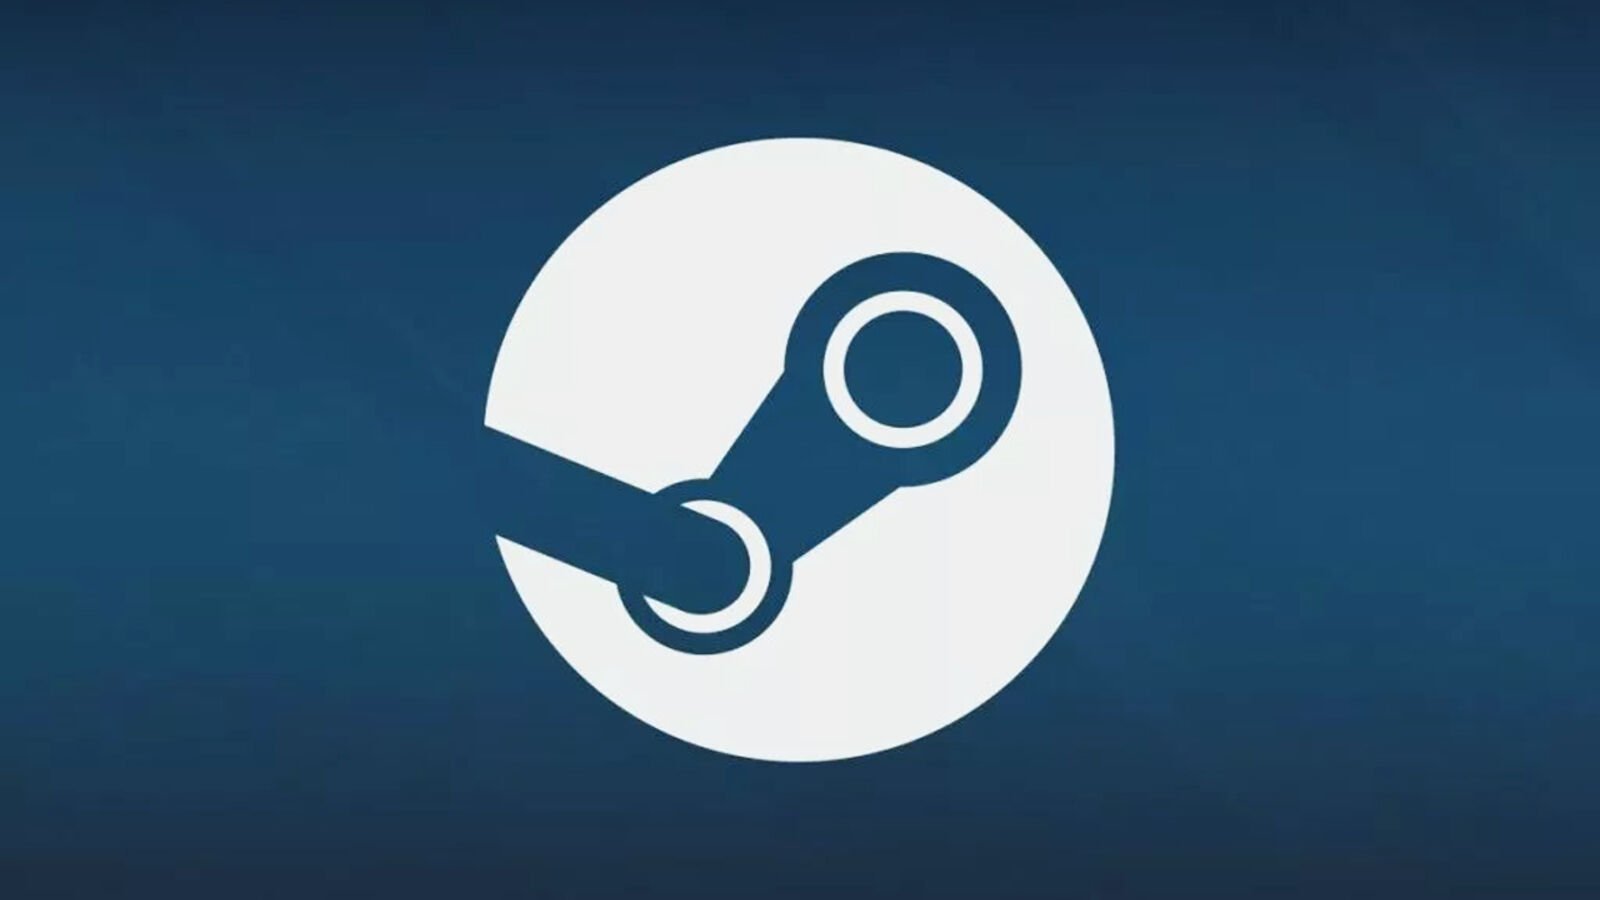 Steam Mobile App Redesign Being Tested By Valve